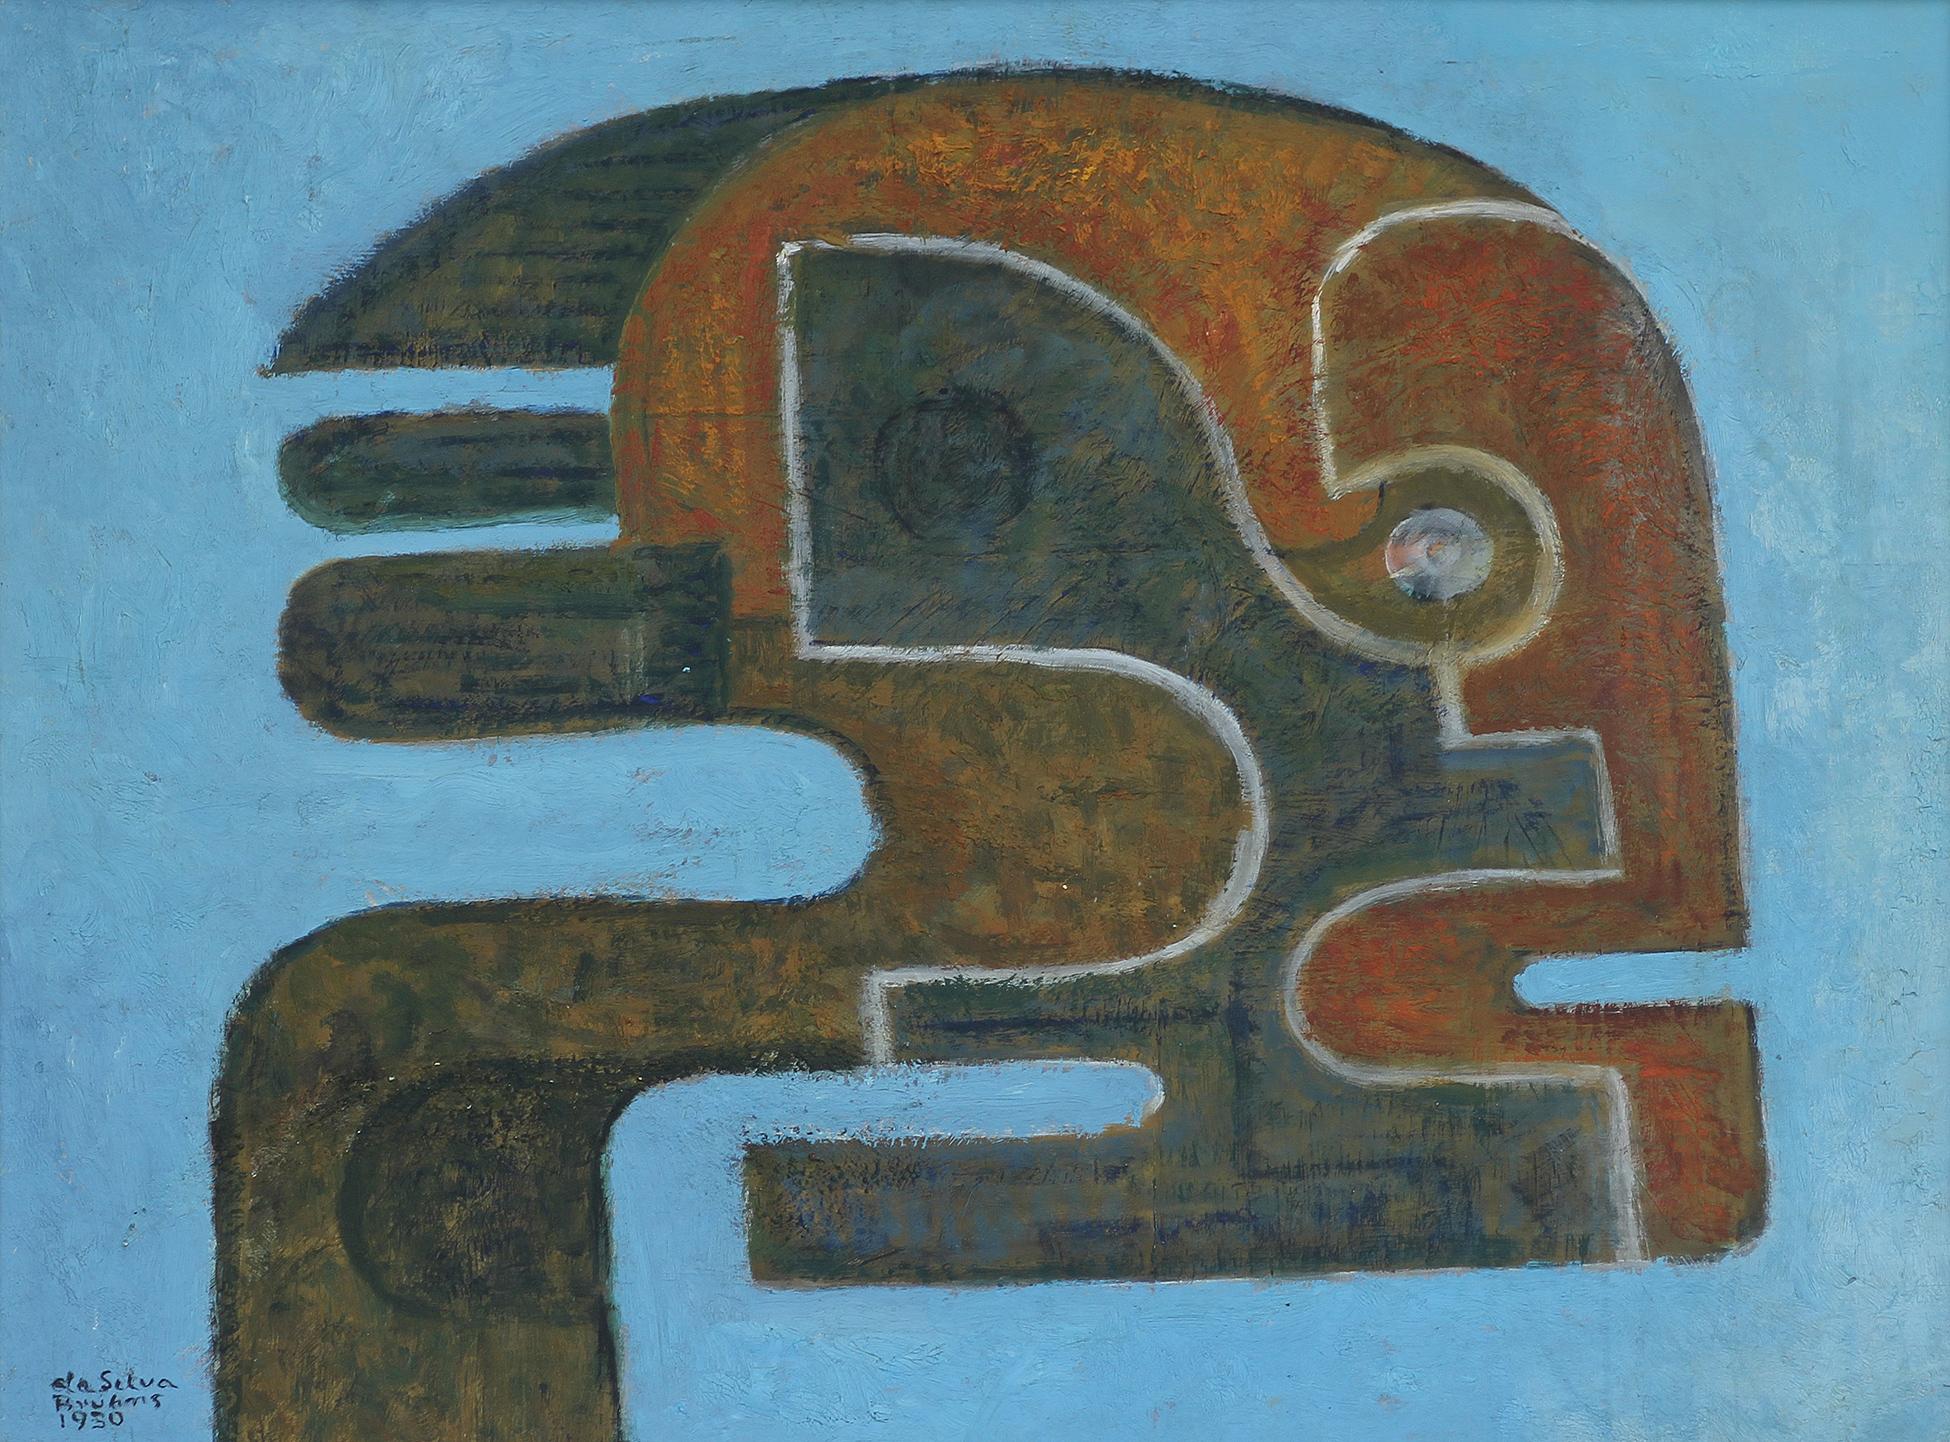 Ivan da Silva Bruhns, (1881-1980)

Oil on board depicting a kind of tribal sculpture
Signed lower left and dated 1930? 1950?? Ref: Opus Nº2527 titled 